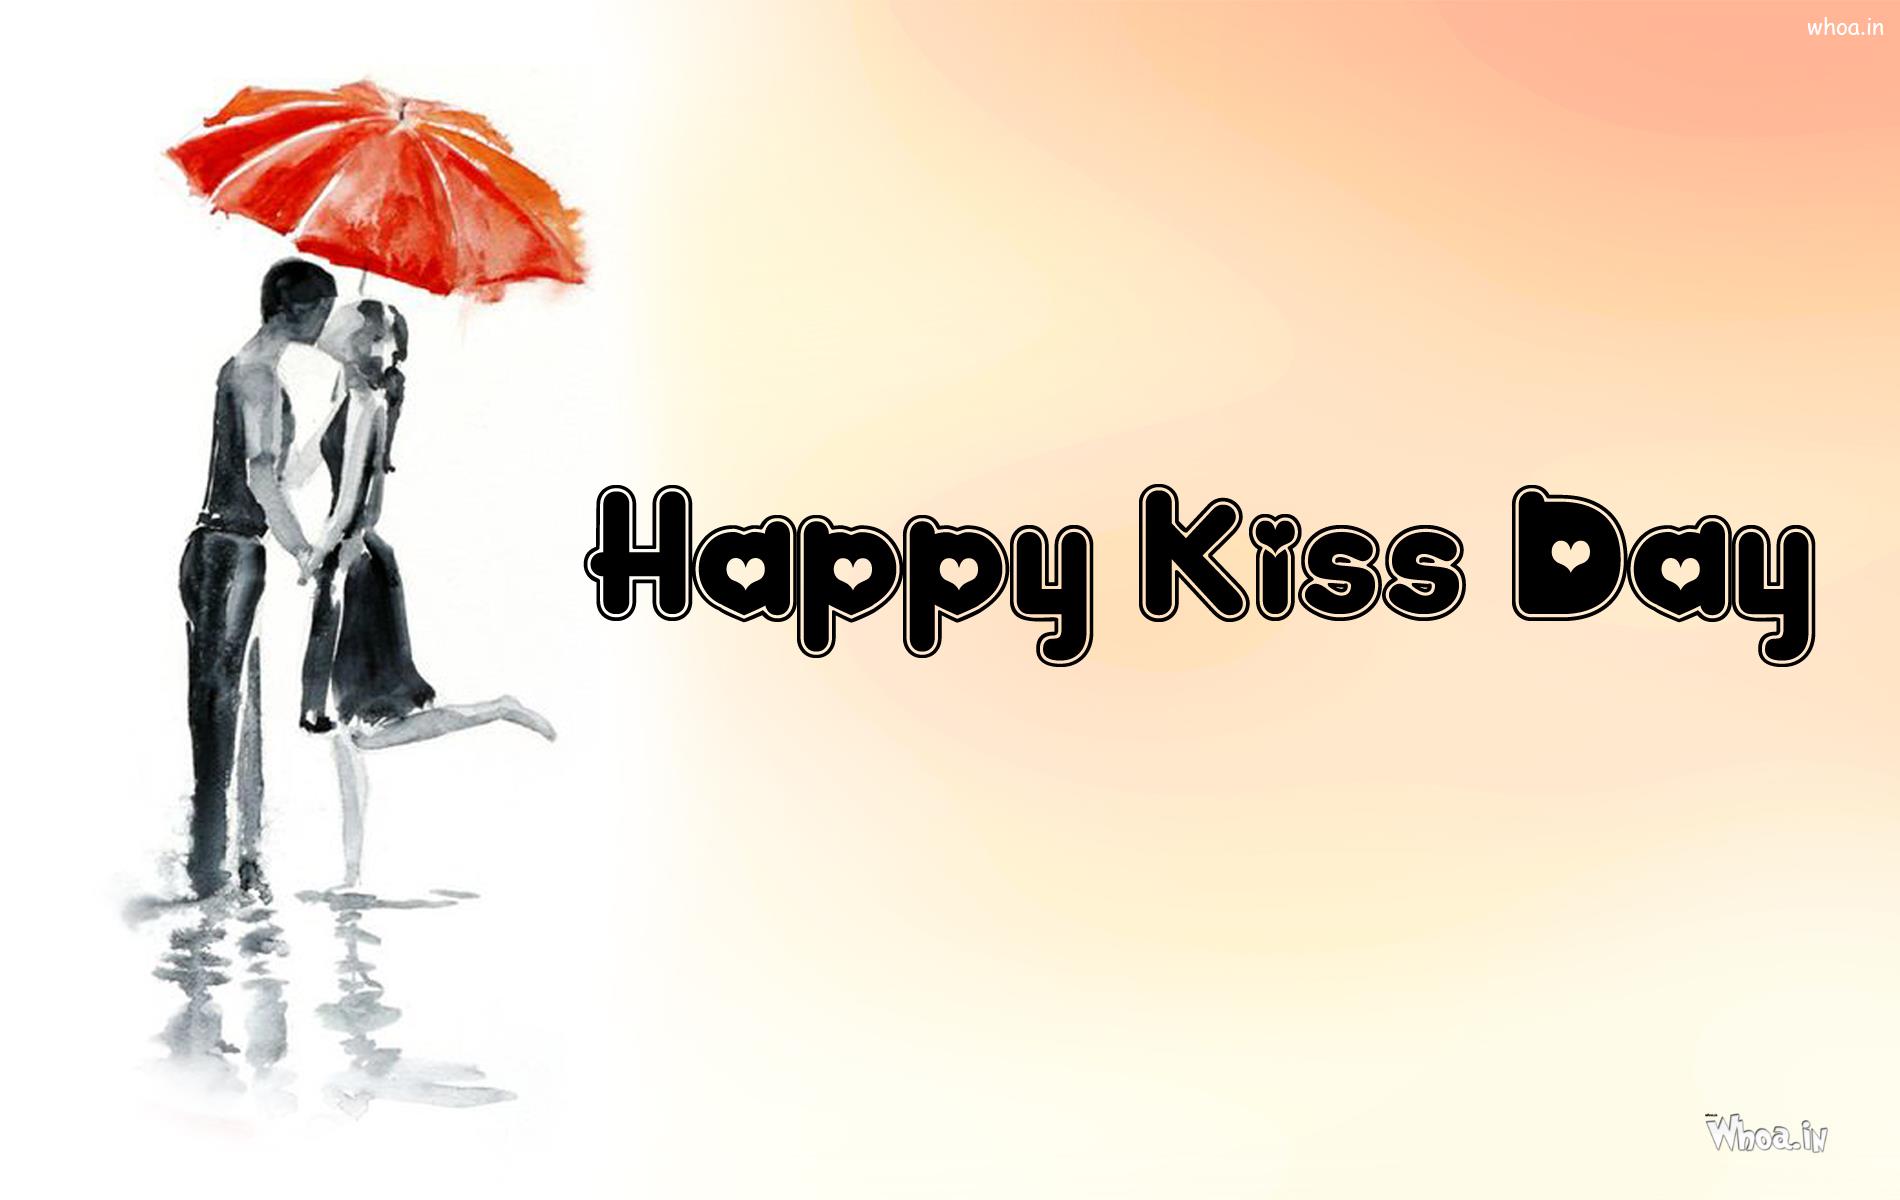 Happy Kiss Day Image Wallpaper Quotes Sms4 Whatsapp